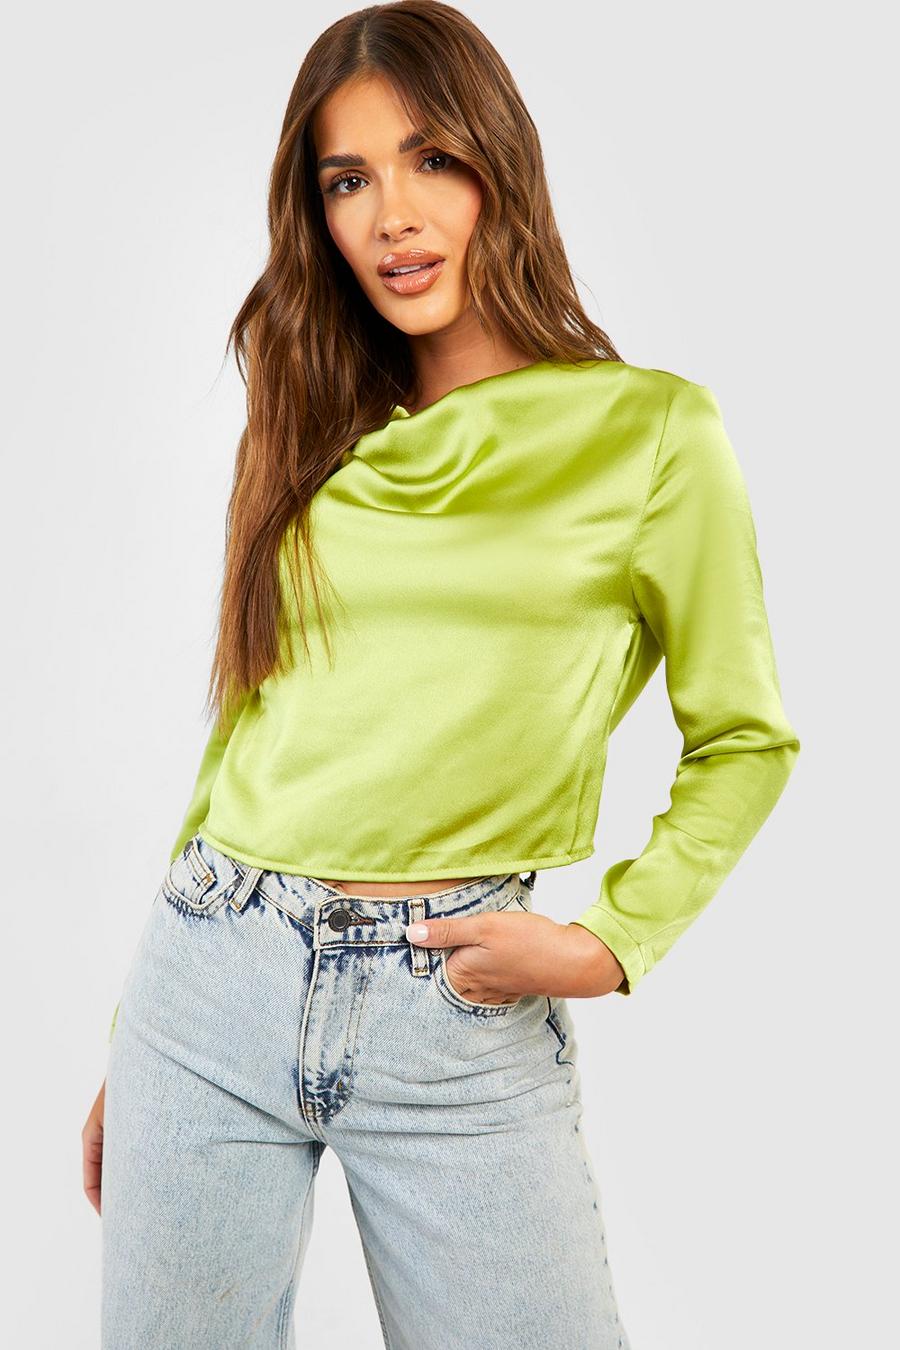 Chartreuse yellow Satin Cowl Back Top